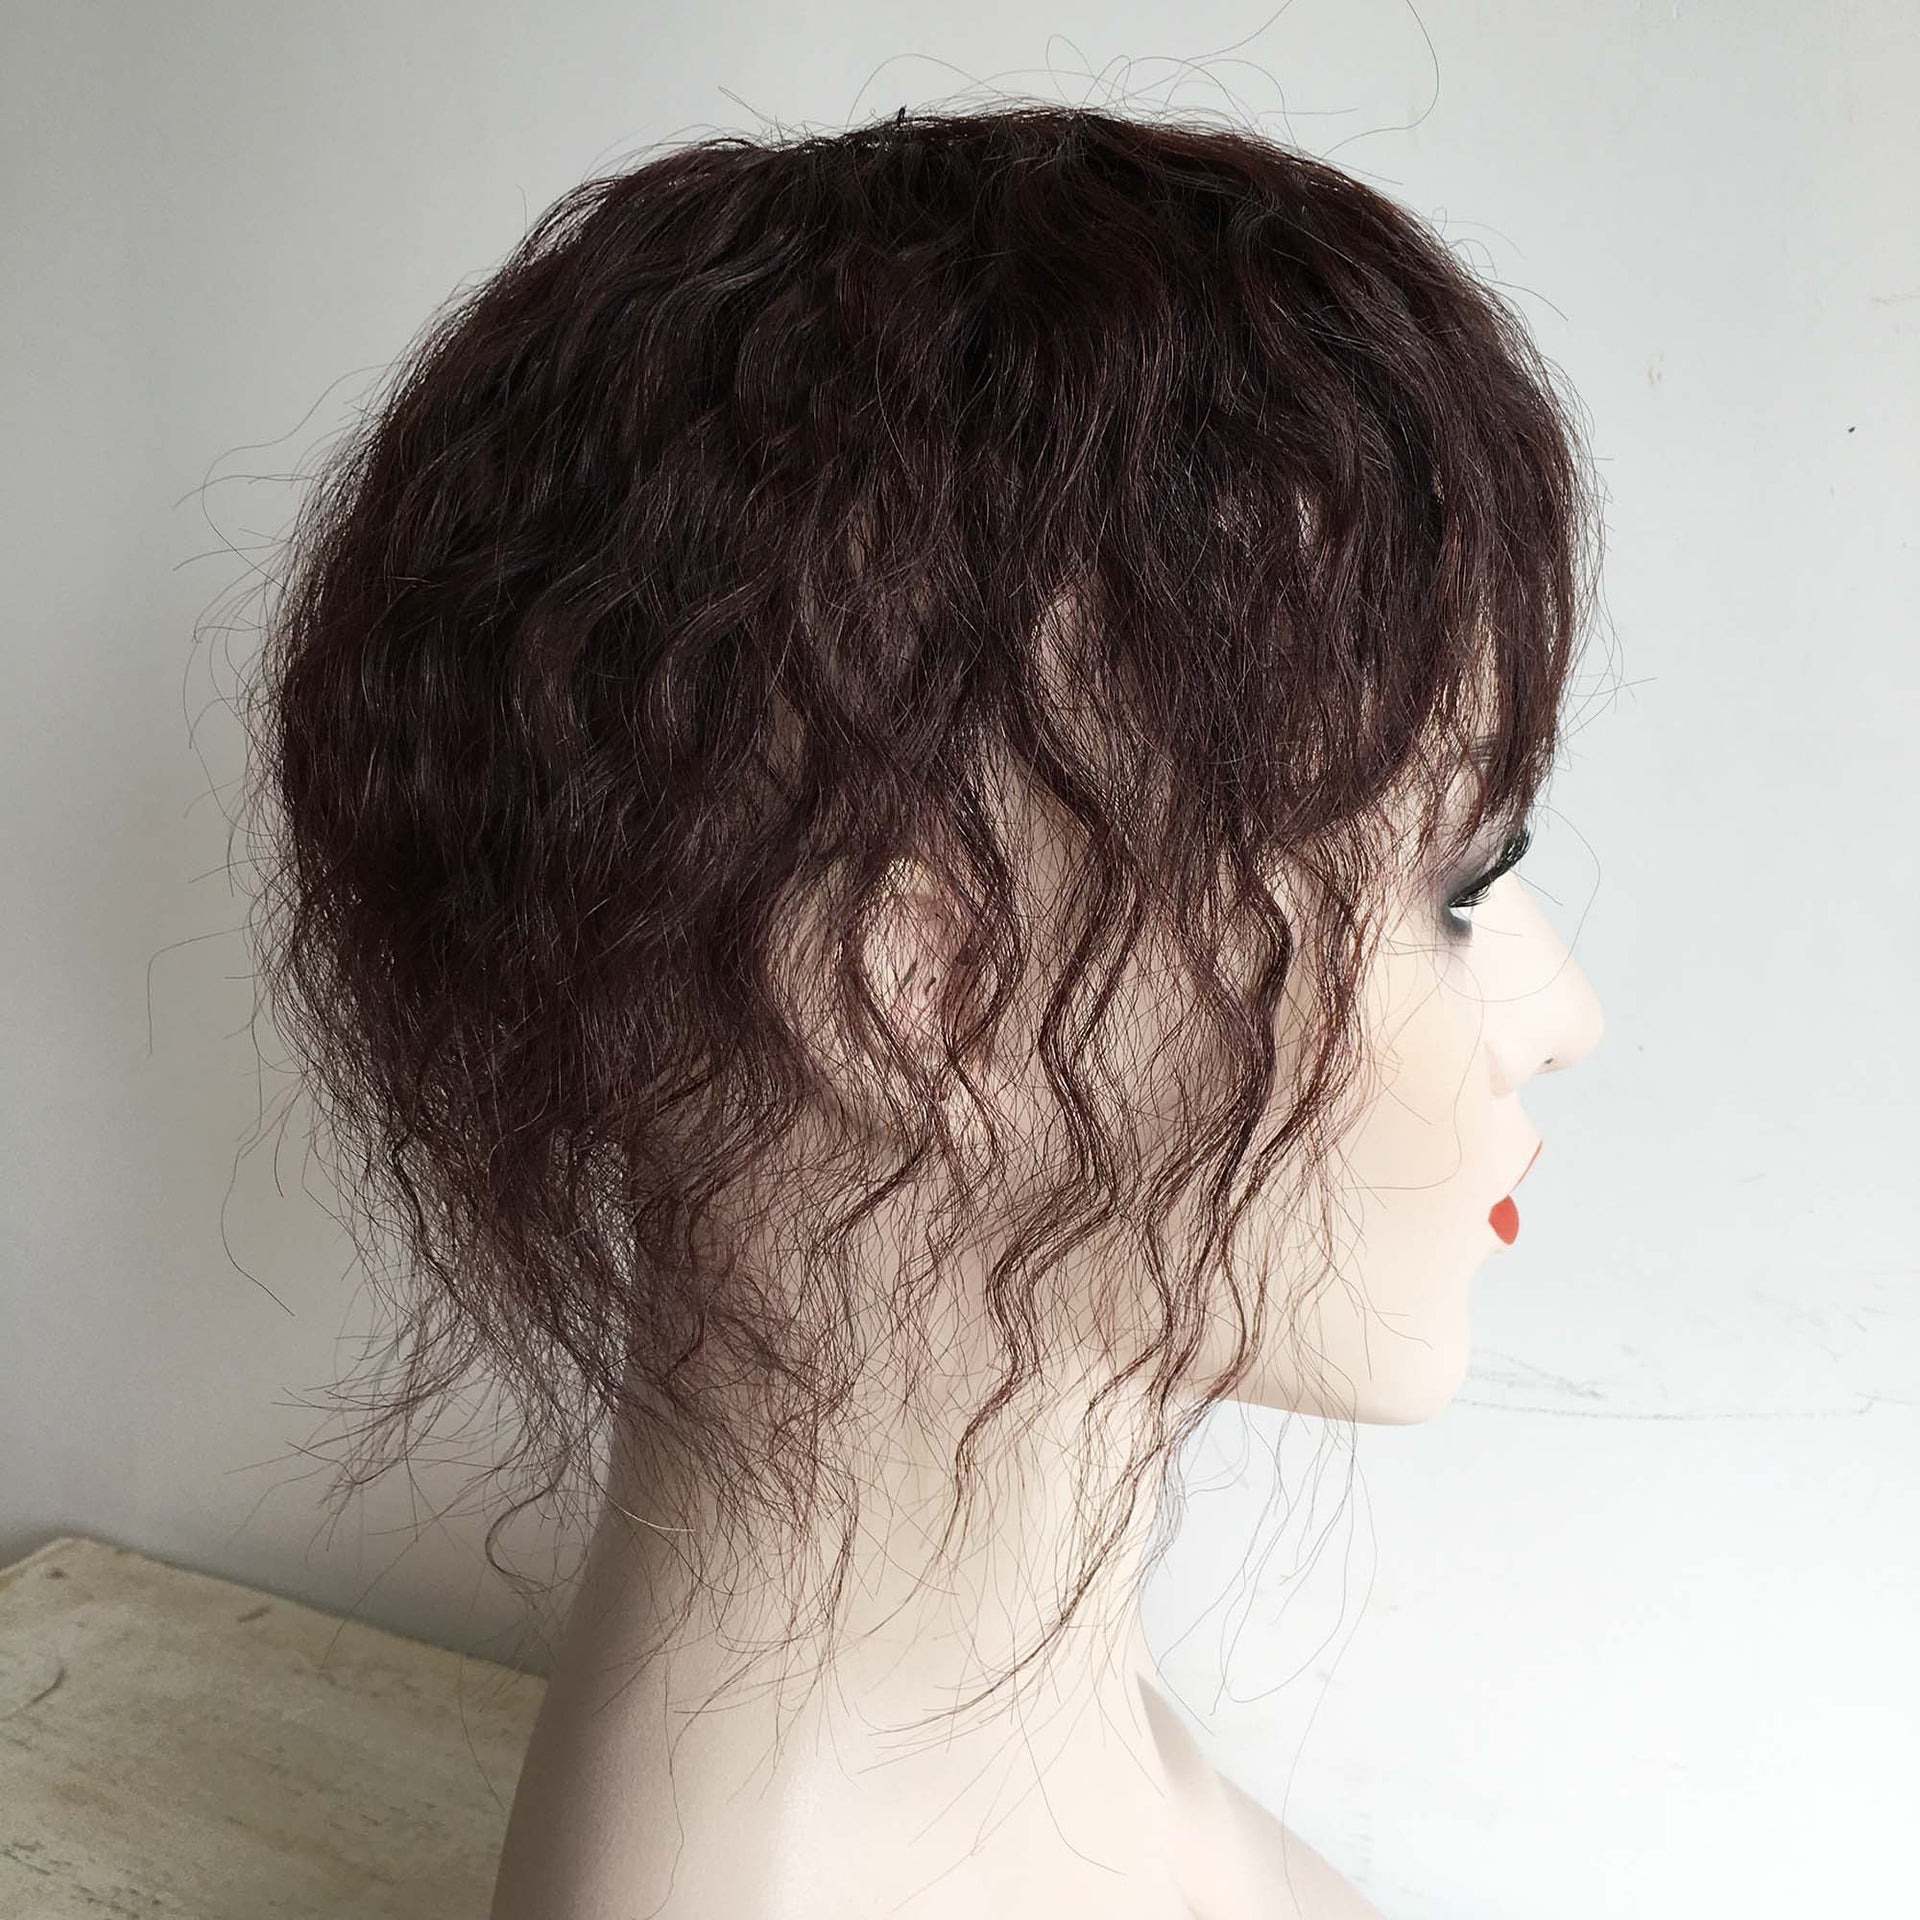 nevermindyrhead Hair Toppers For Women Real Human Hair Dark Brown Curly With Bangs For Thinning Hair Wiglets